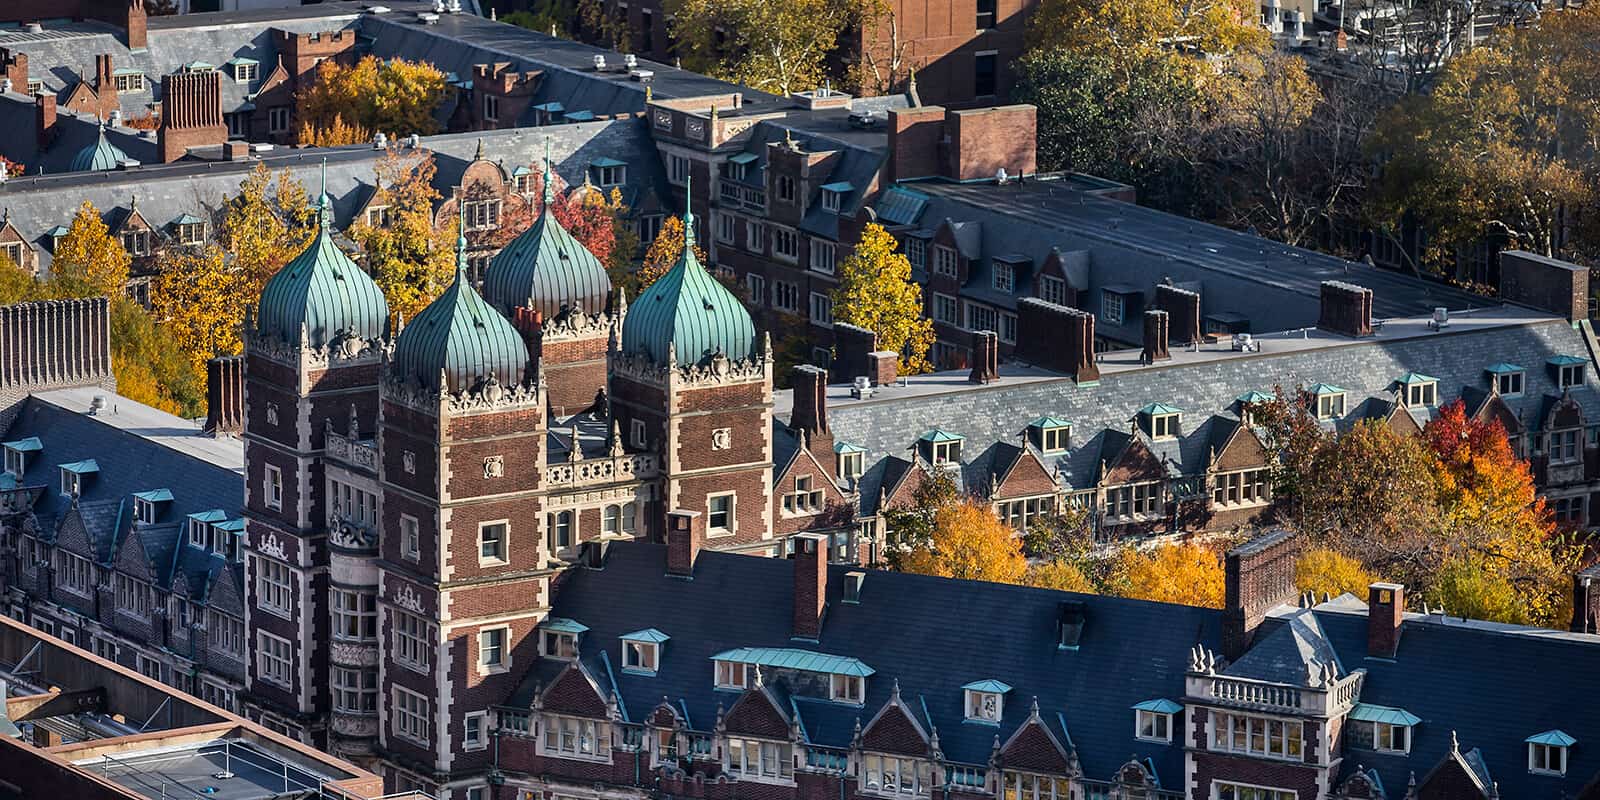 A photo of the University of Pennsylvania's campus.